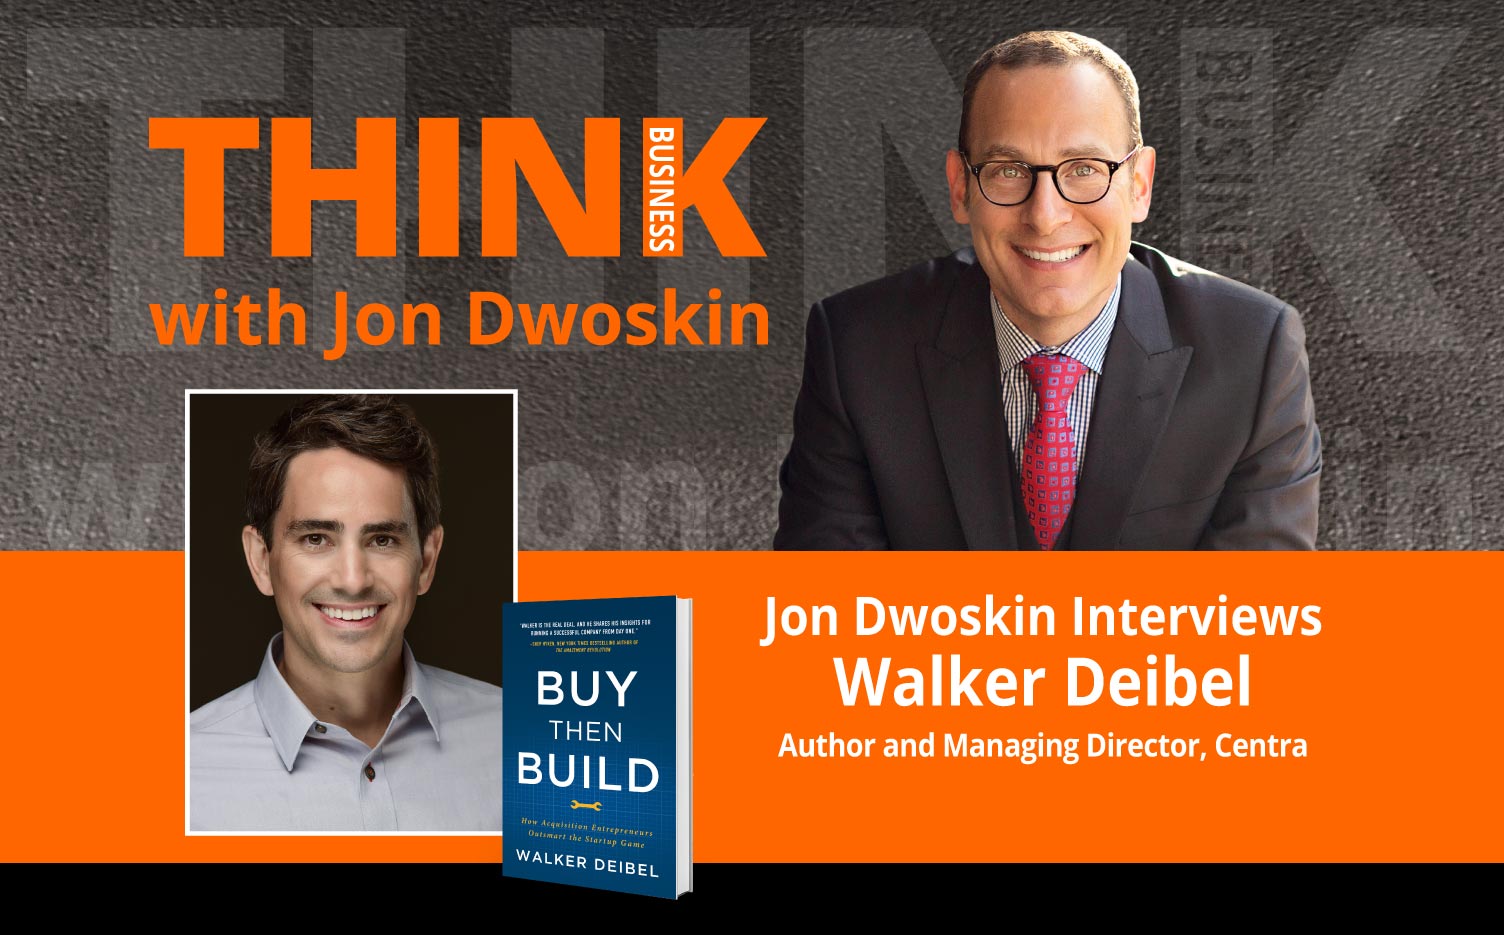 THINK Business Podcast: Jon Dwoskin Interviews Walker Deibel, Author and Managing Director, Centra